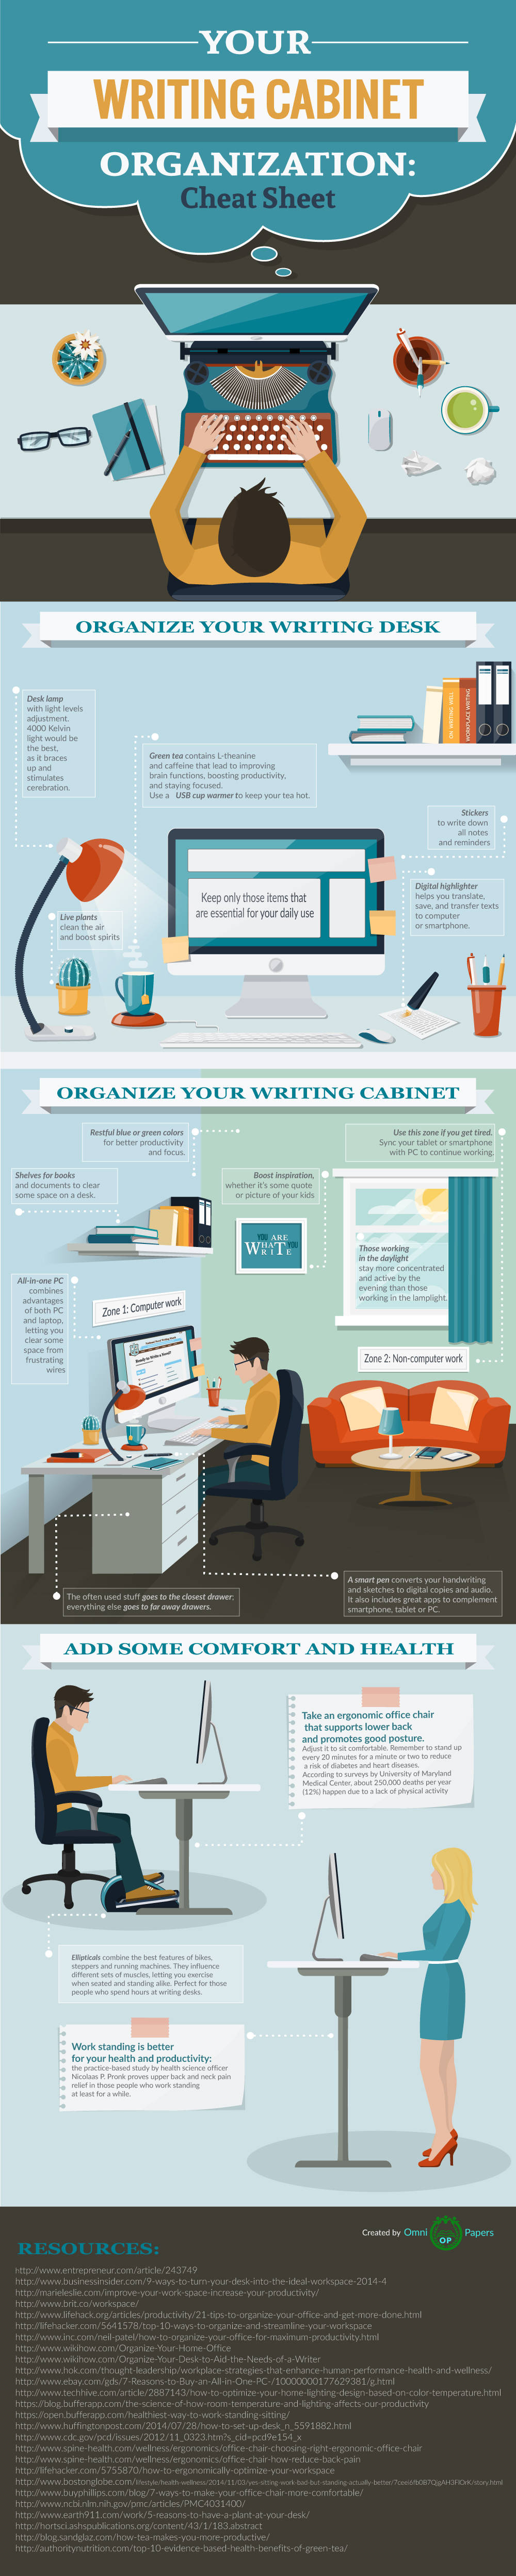 your-writing-cabinet-organization-infographic